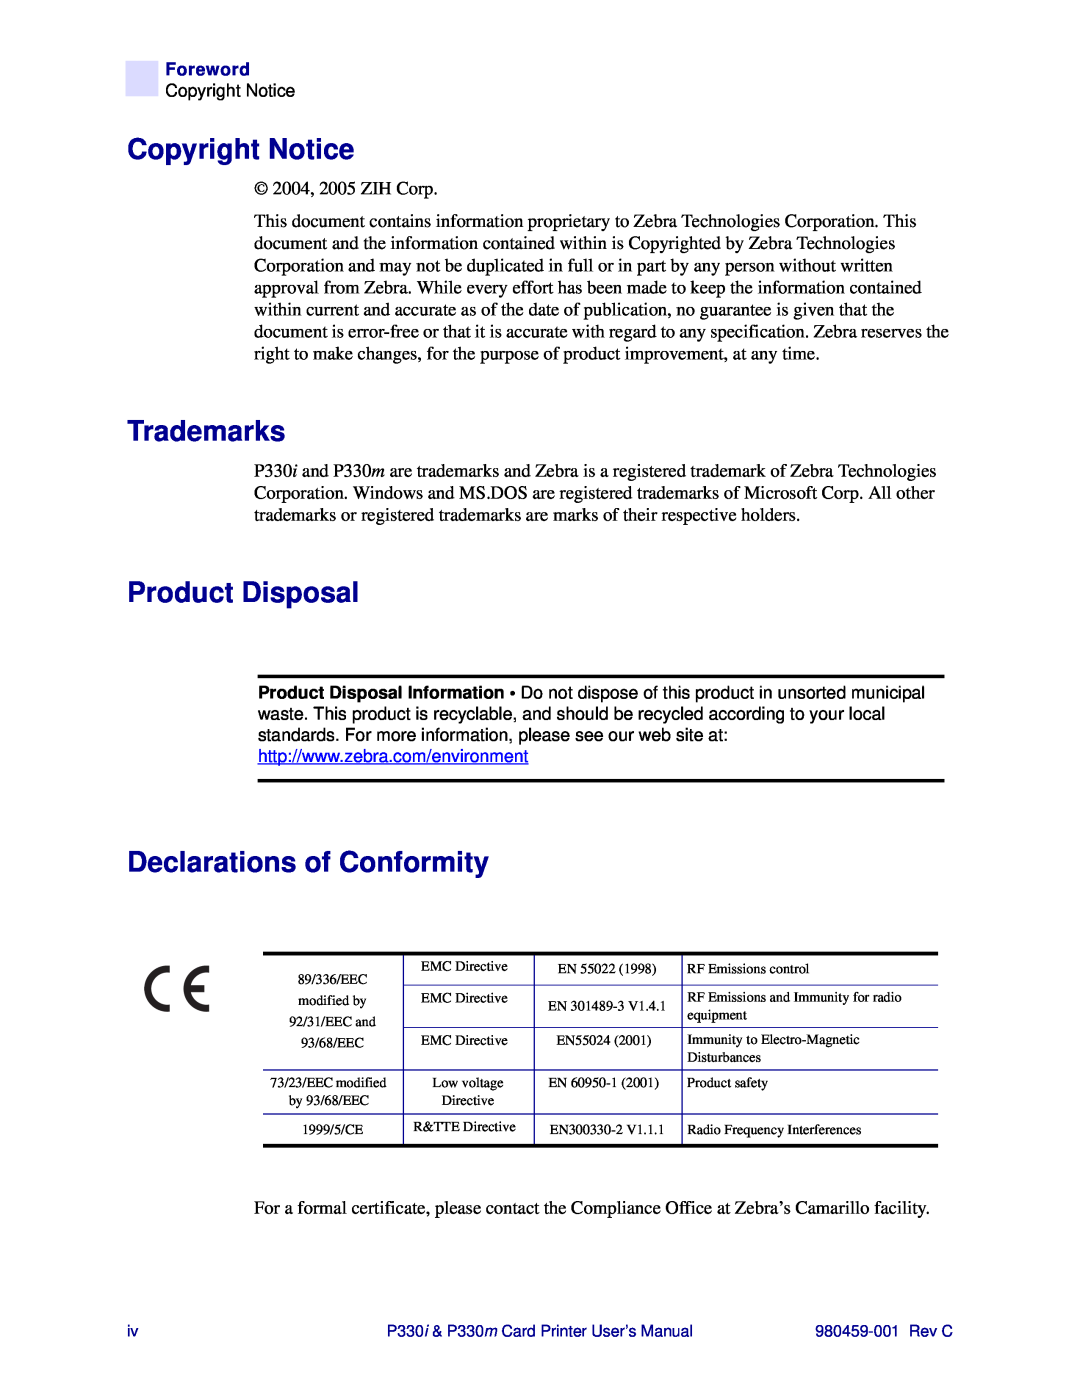 Zebra Technologies P330i, P330m user manual Copyright Notice, Trademarks, Product Disposal, Declarations of Conformity 